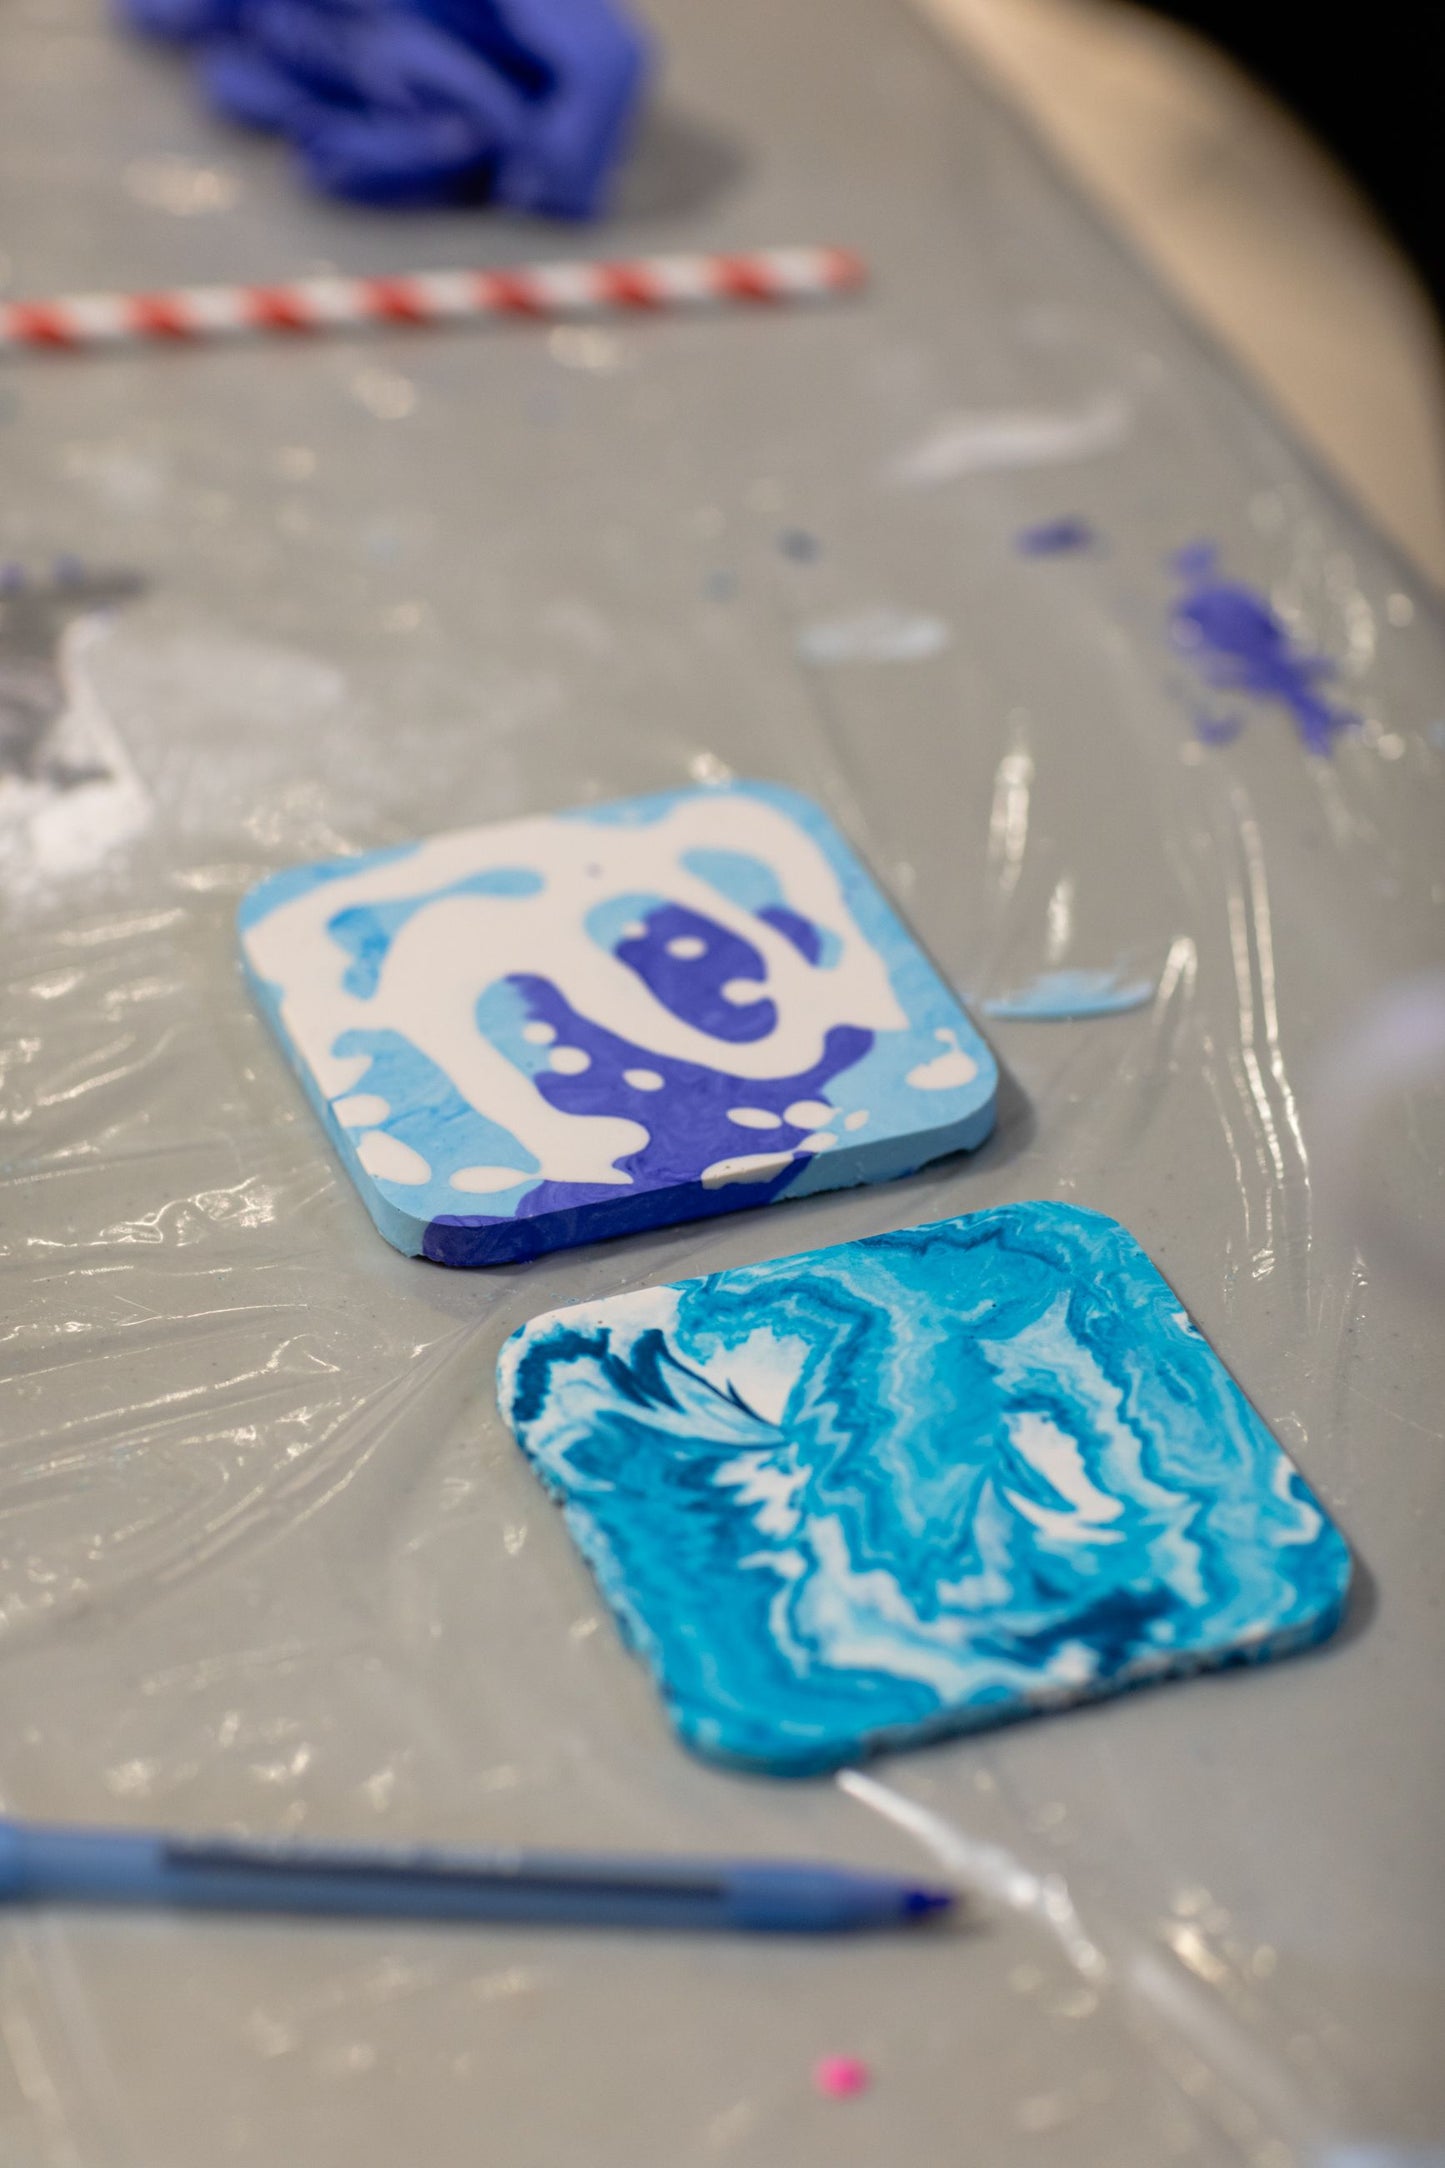 Eco Friendly Aqua Resin Coasters Workshop - Wednesday May 10th at 7pm